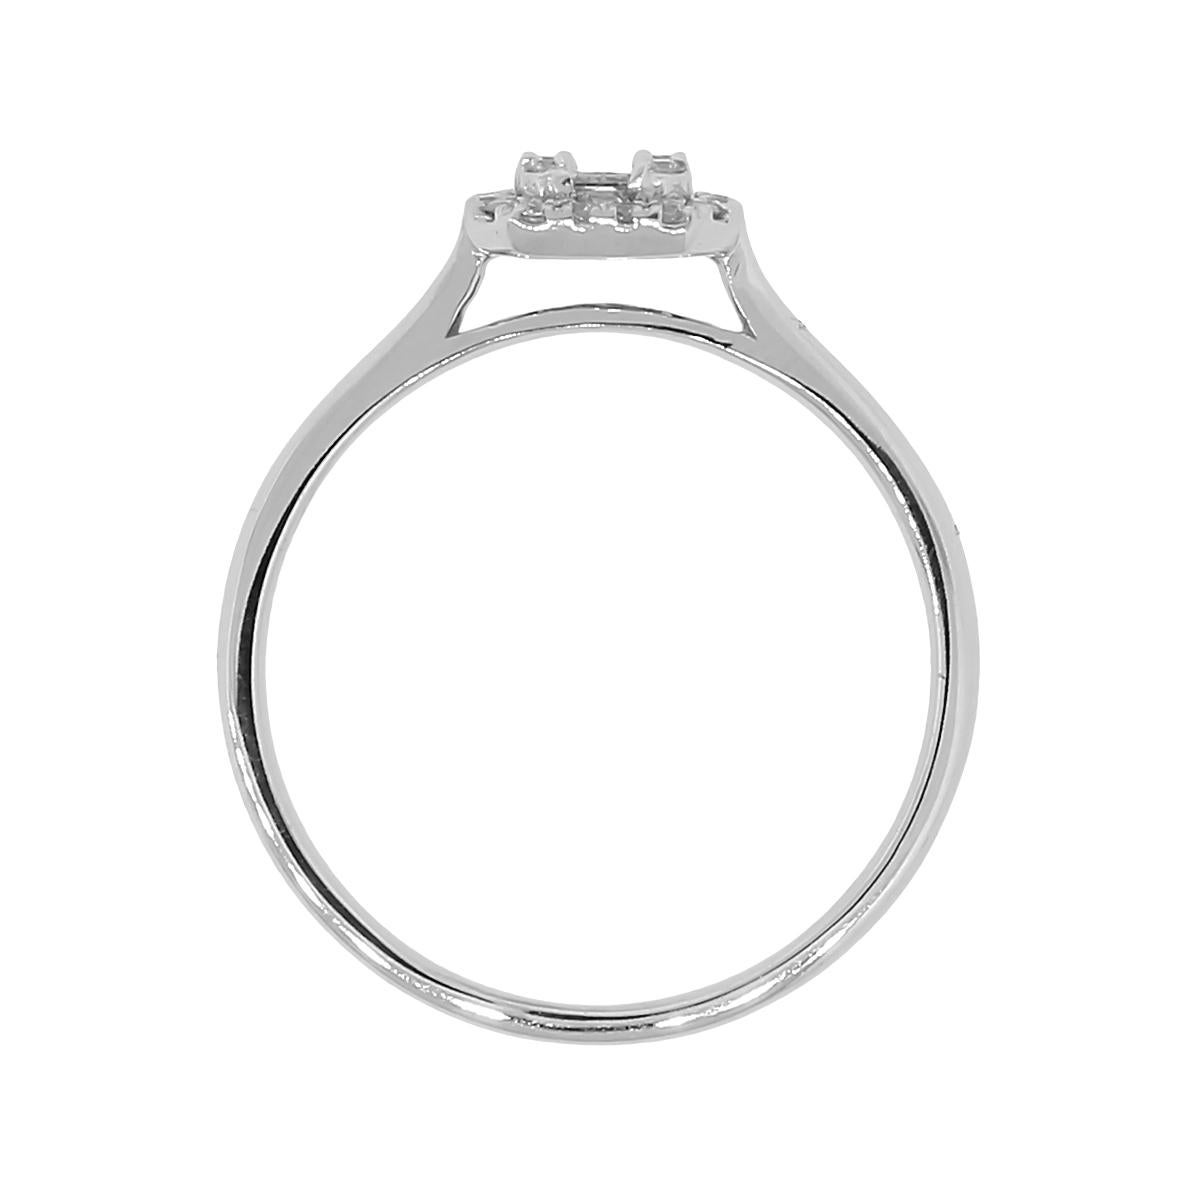 Material: 14k white gold
Diamond Details: Approximately 0.27ctw of round brilliant and baguette shape diamonds. Diamonds are I/J in color and VS-SI3 in clarity.
Ring Size: 6.50
Ring Measurements: 0.90″ x 0.30″ x 0.76″
Total Weight: 2g